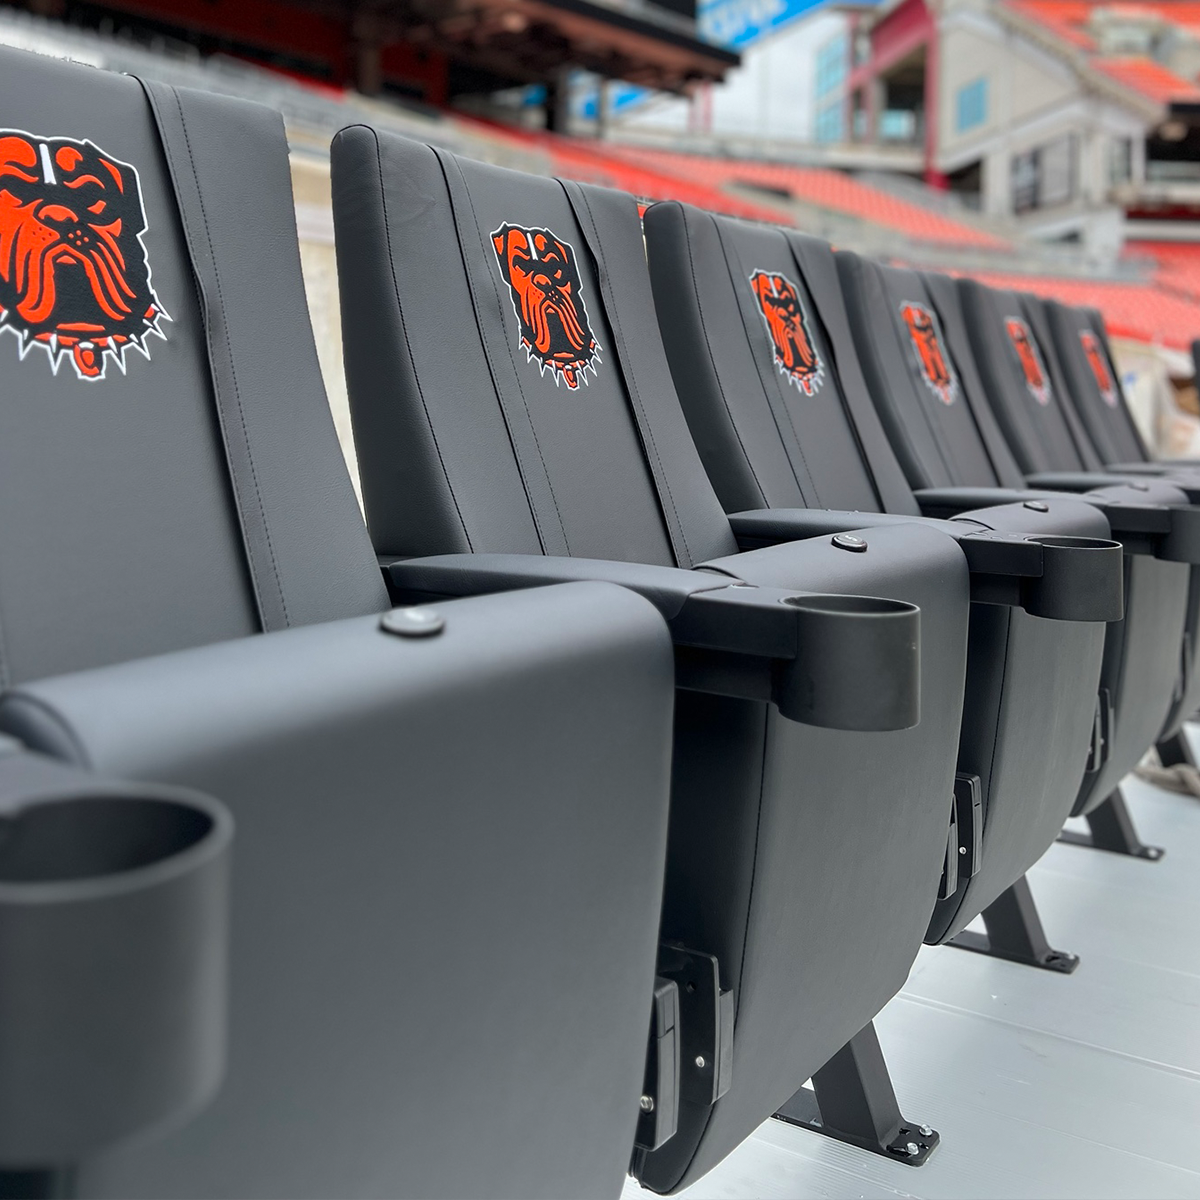 SuiteMax 3.5 VIP Seats with Denver Nuggets 2024 Playoffs Logo